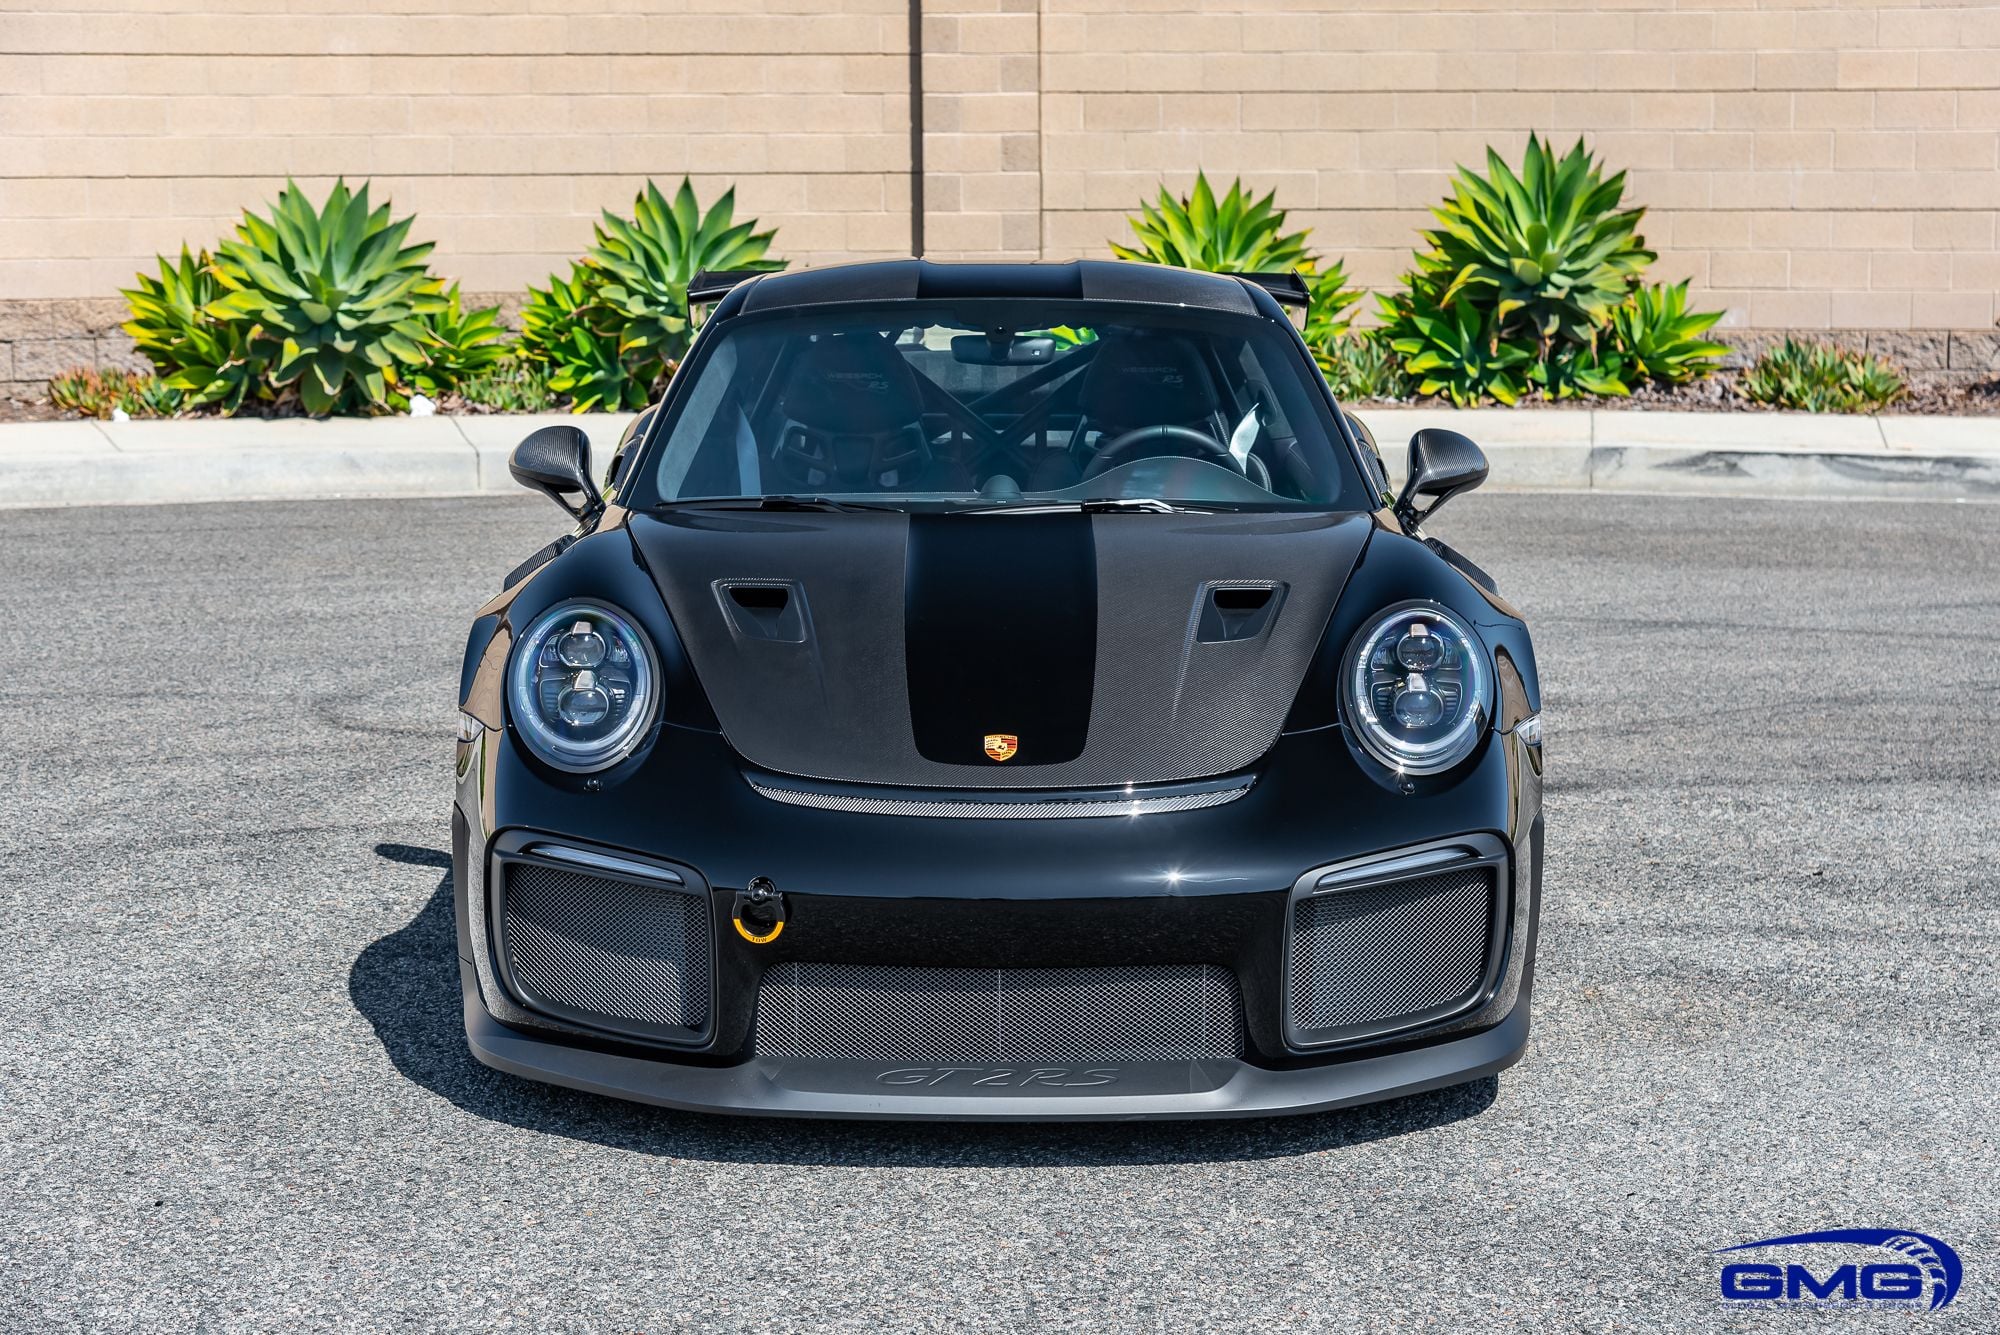 2018 Porsche GT2 - Black Porsche 991 GT2 RS FOR SALE - Low miles, GMG upgrades, track ready, stunning! - Used - VIN WP0AE2A93JS185195 - 2,300 Miles - 6 cyl - 2WD - Automatic - Coupe - Black - Southern California, CA 92704, United States